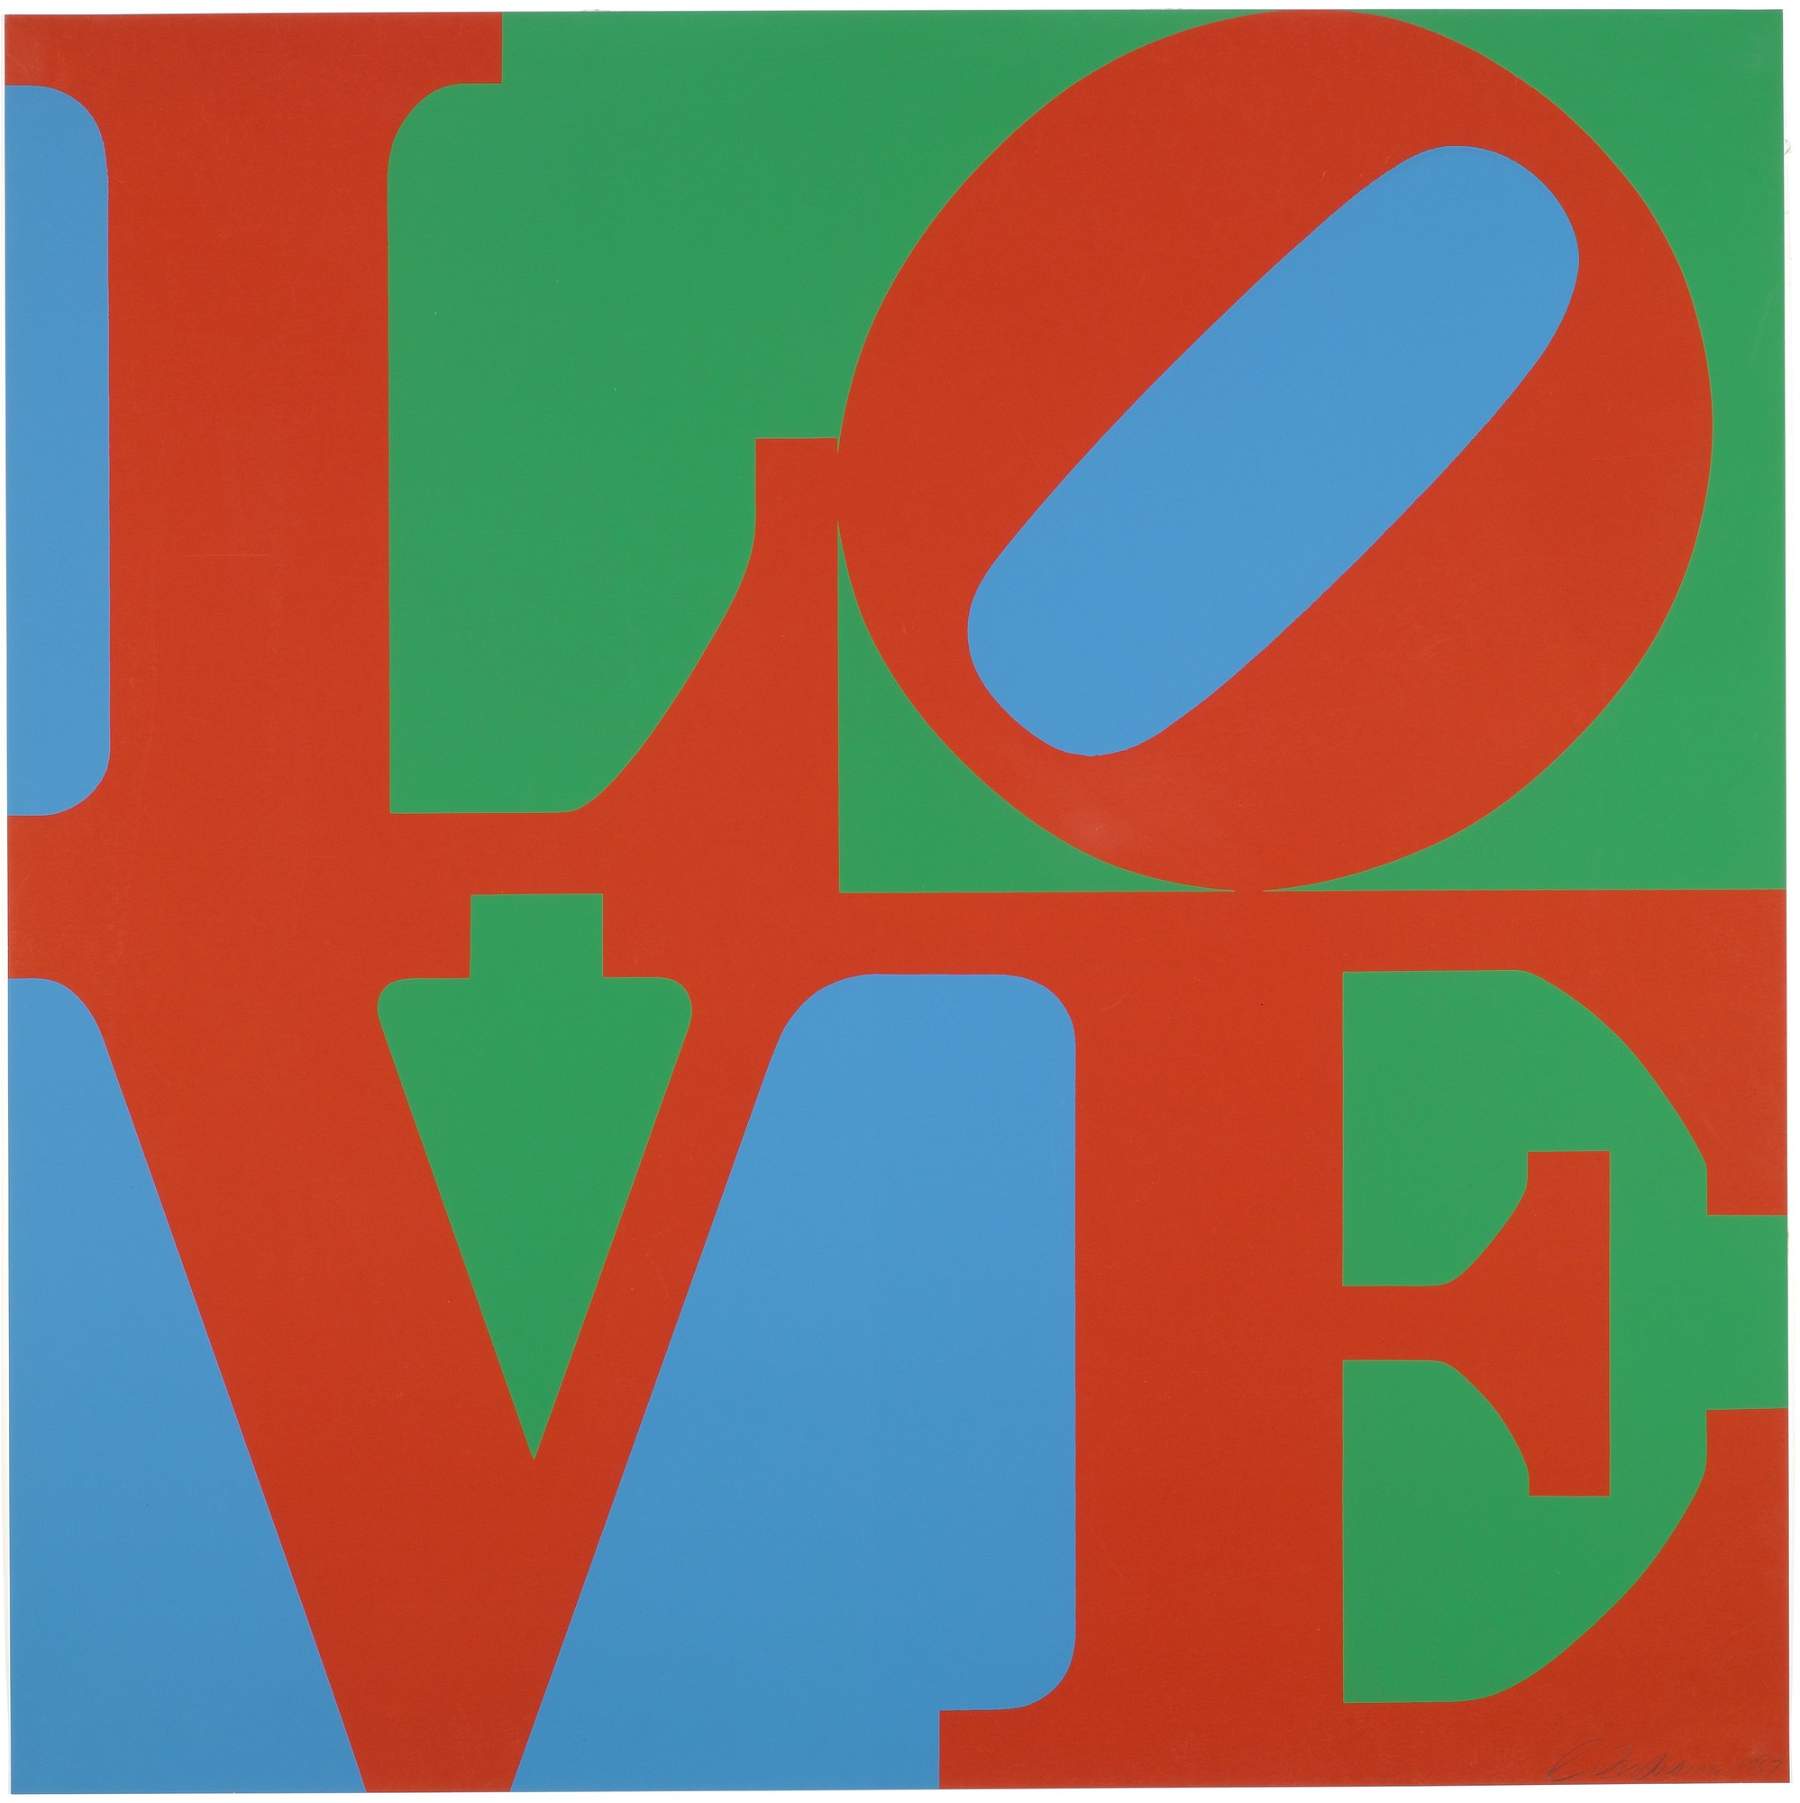 Farewell to Robert Indiana, the father of the celebrated LOVE